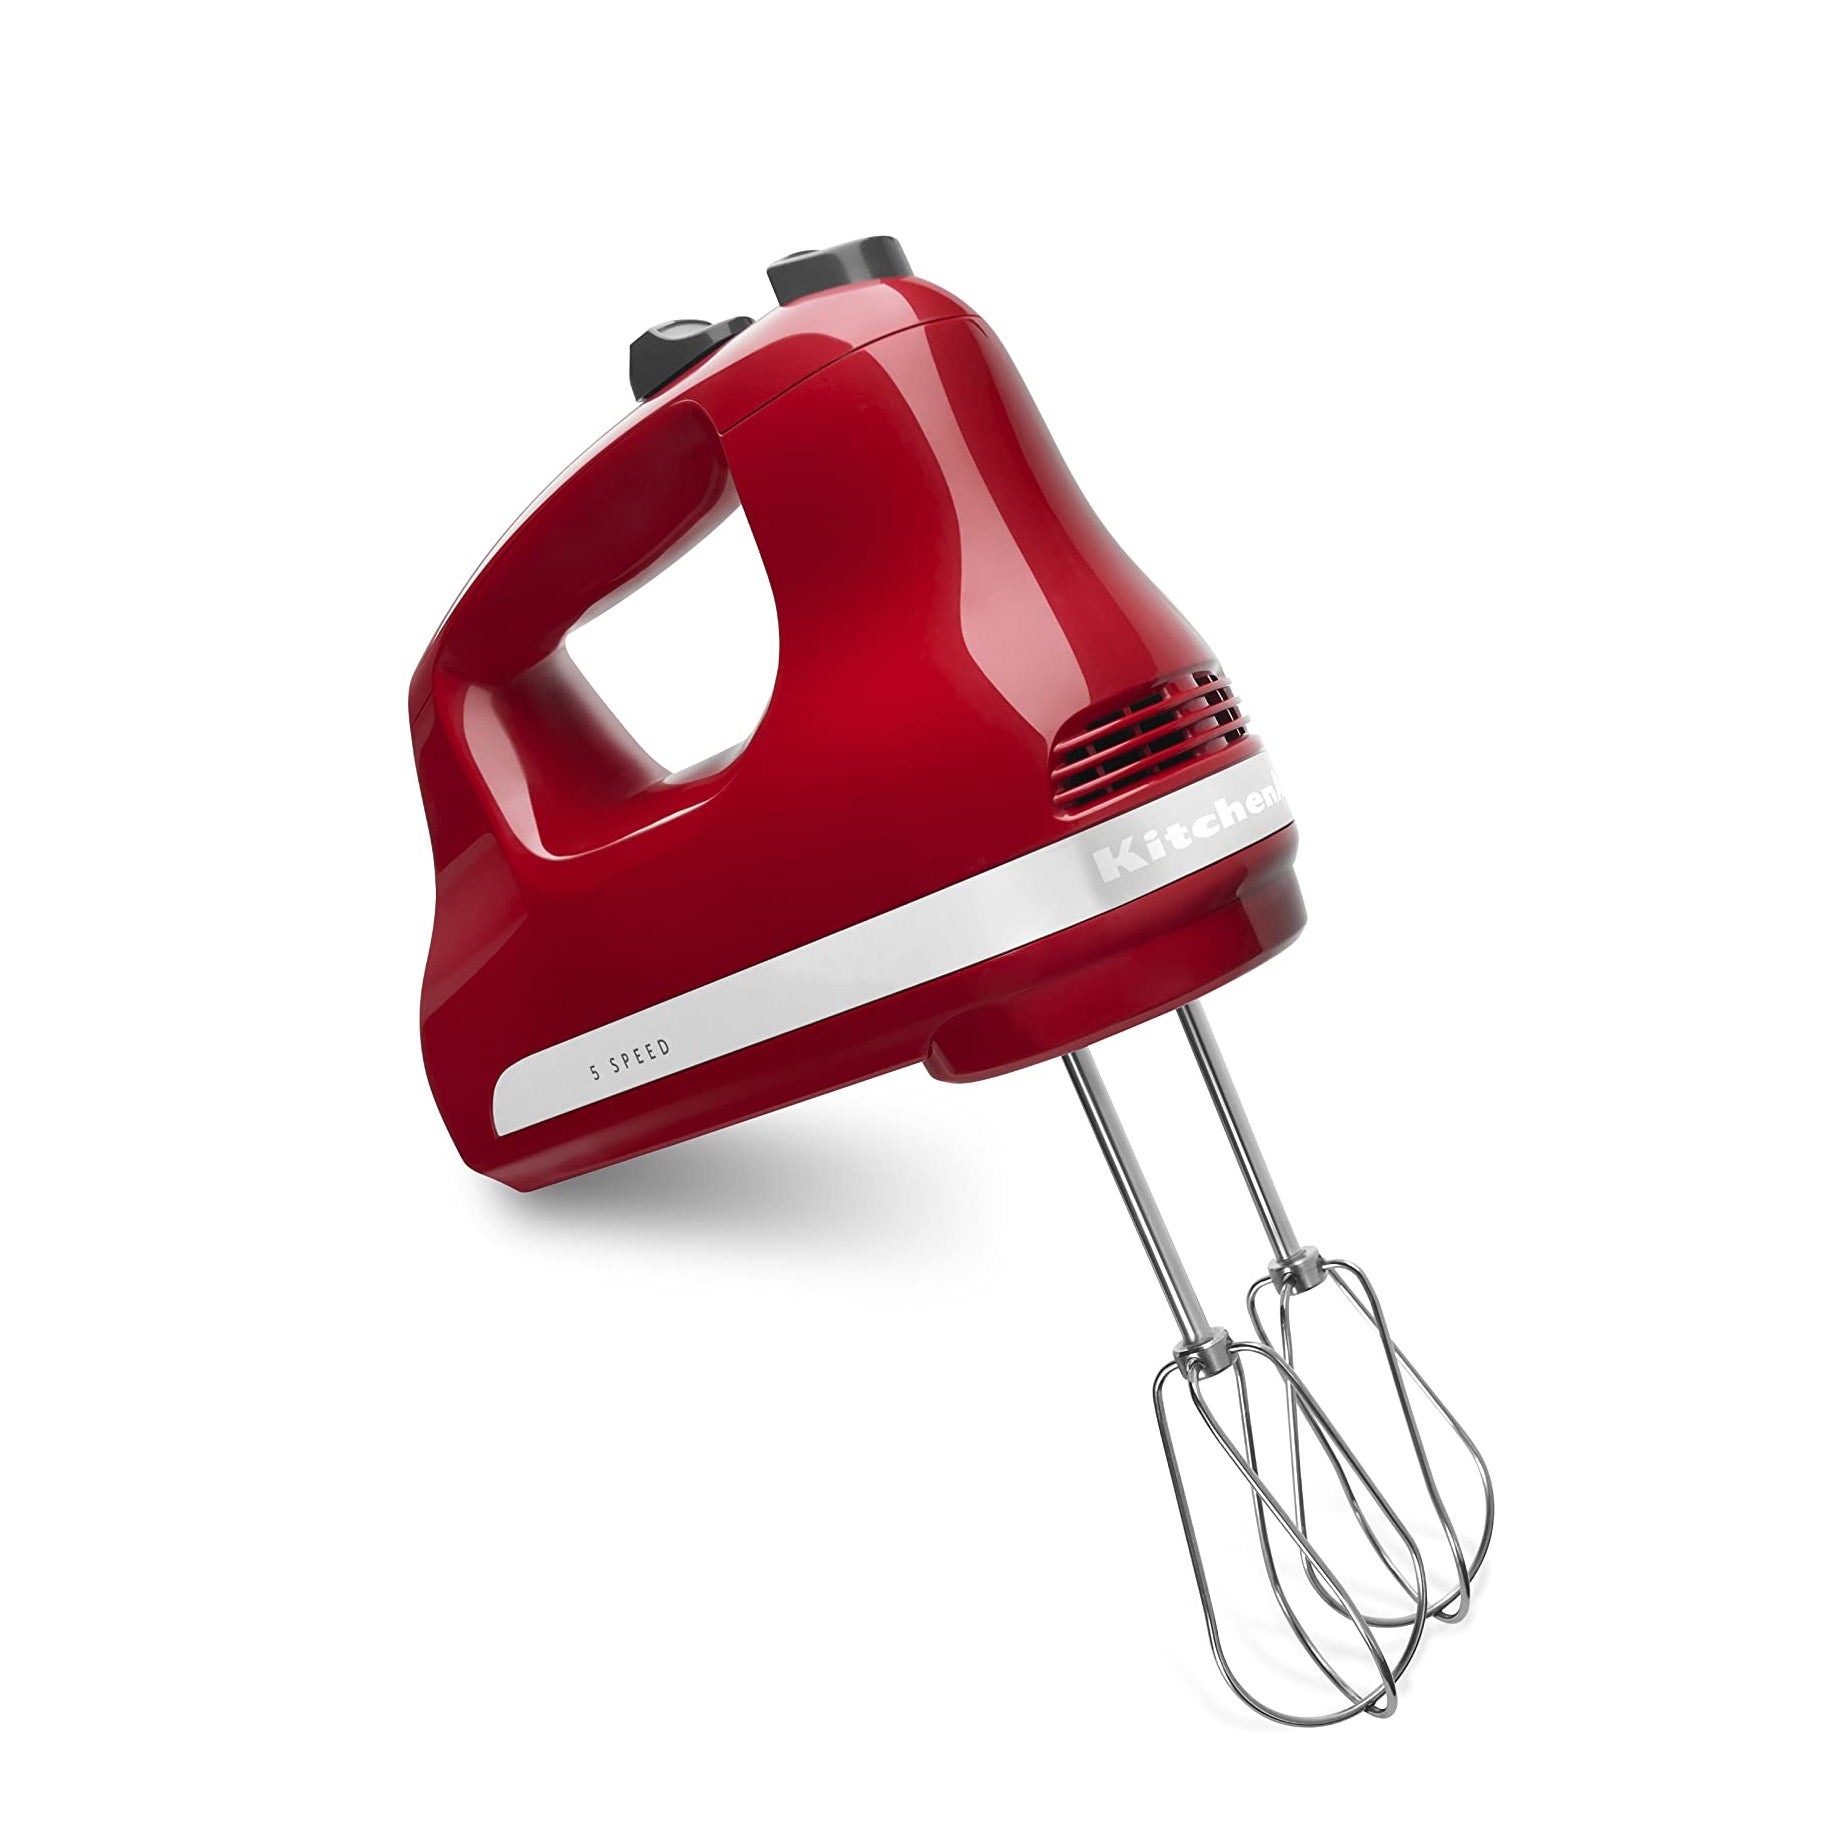 Best hand mixer with paddle attachment - Jody's Bakery